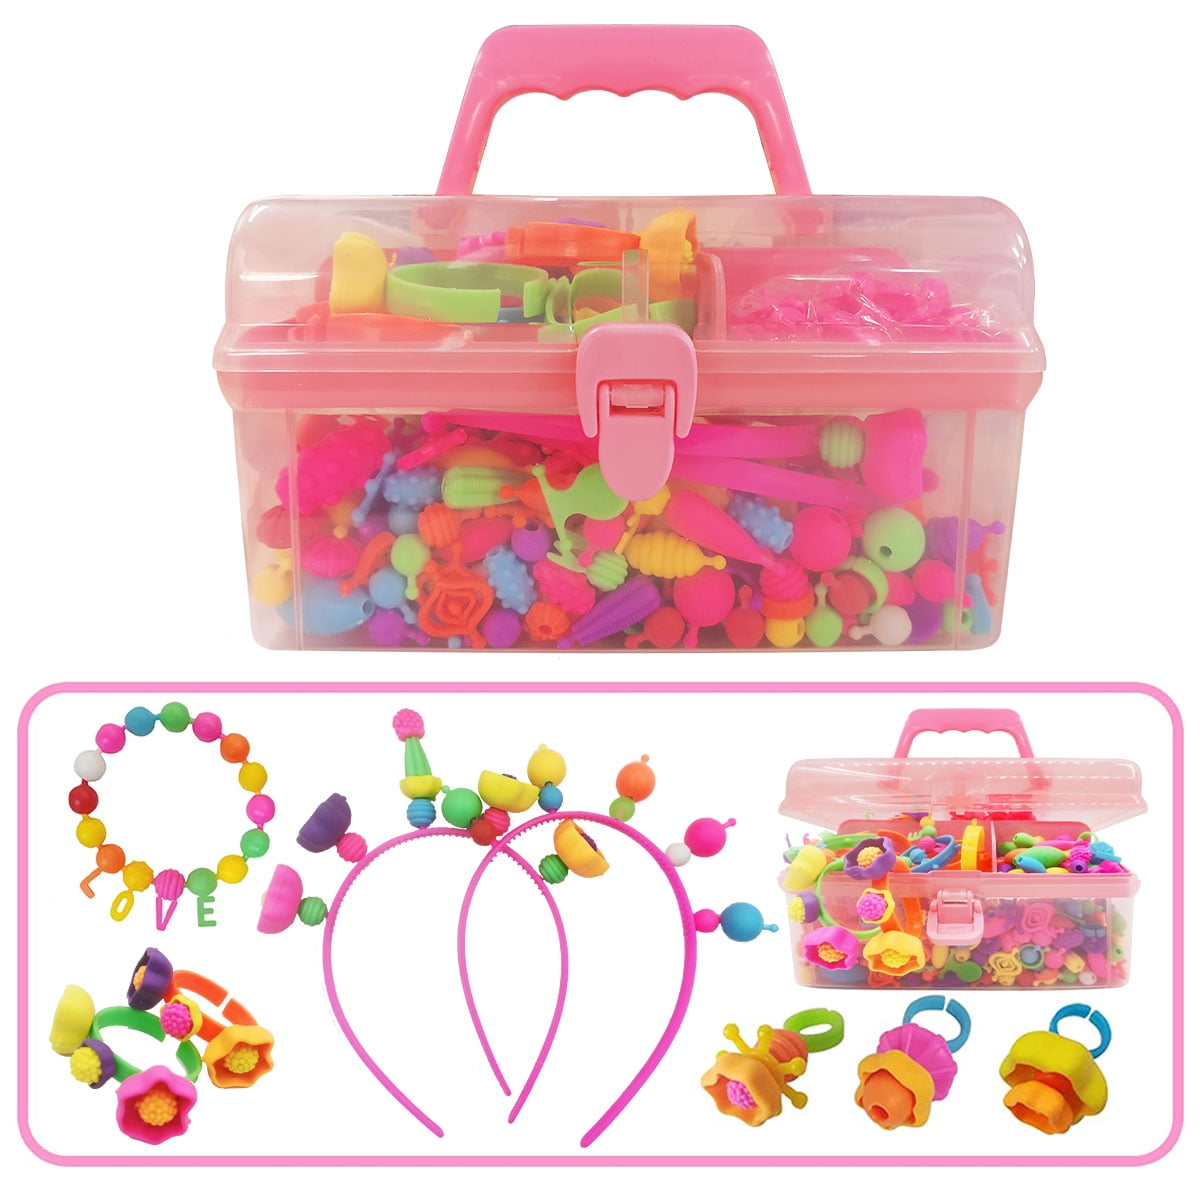 KidEwan Pop Beads, Jewelry Making Kit - Arts and Crafts for Girls Age 4, 5,  6, 7 Years Old, Kids Snap Beads Toys - Necklace, Bracelet, Ring Creative